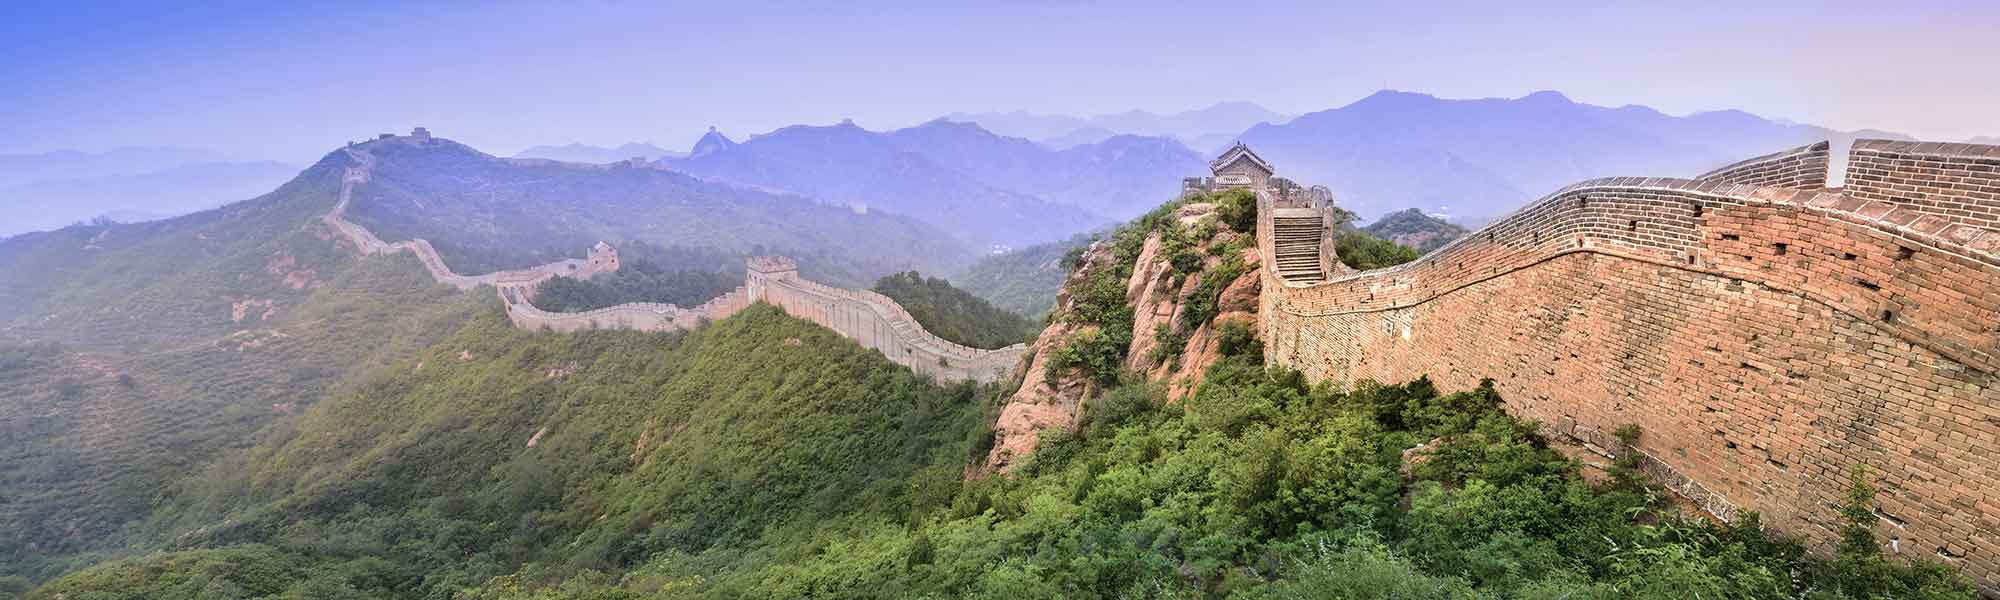 A photo of the Great Wall of China